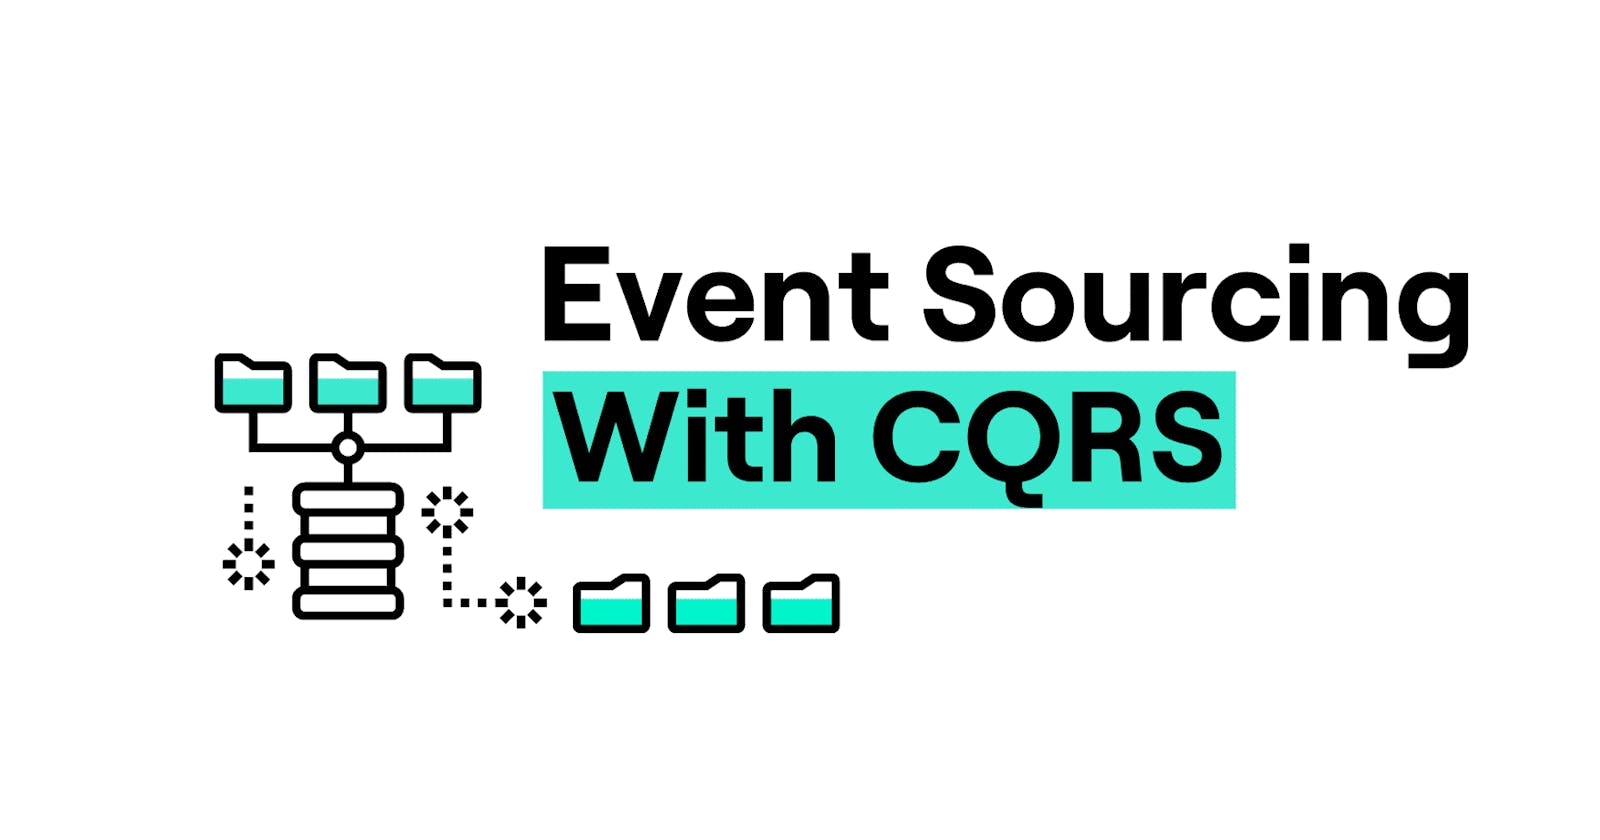 ASP.NET Core: How to Implement Event-Sourcing with CQRS?